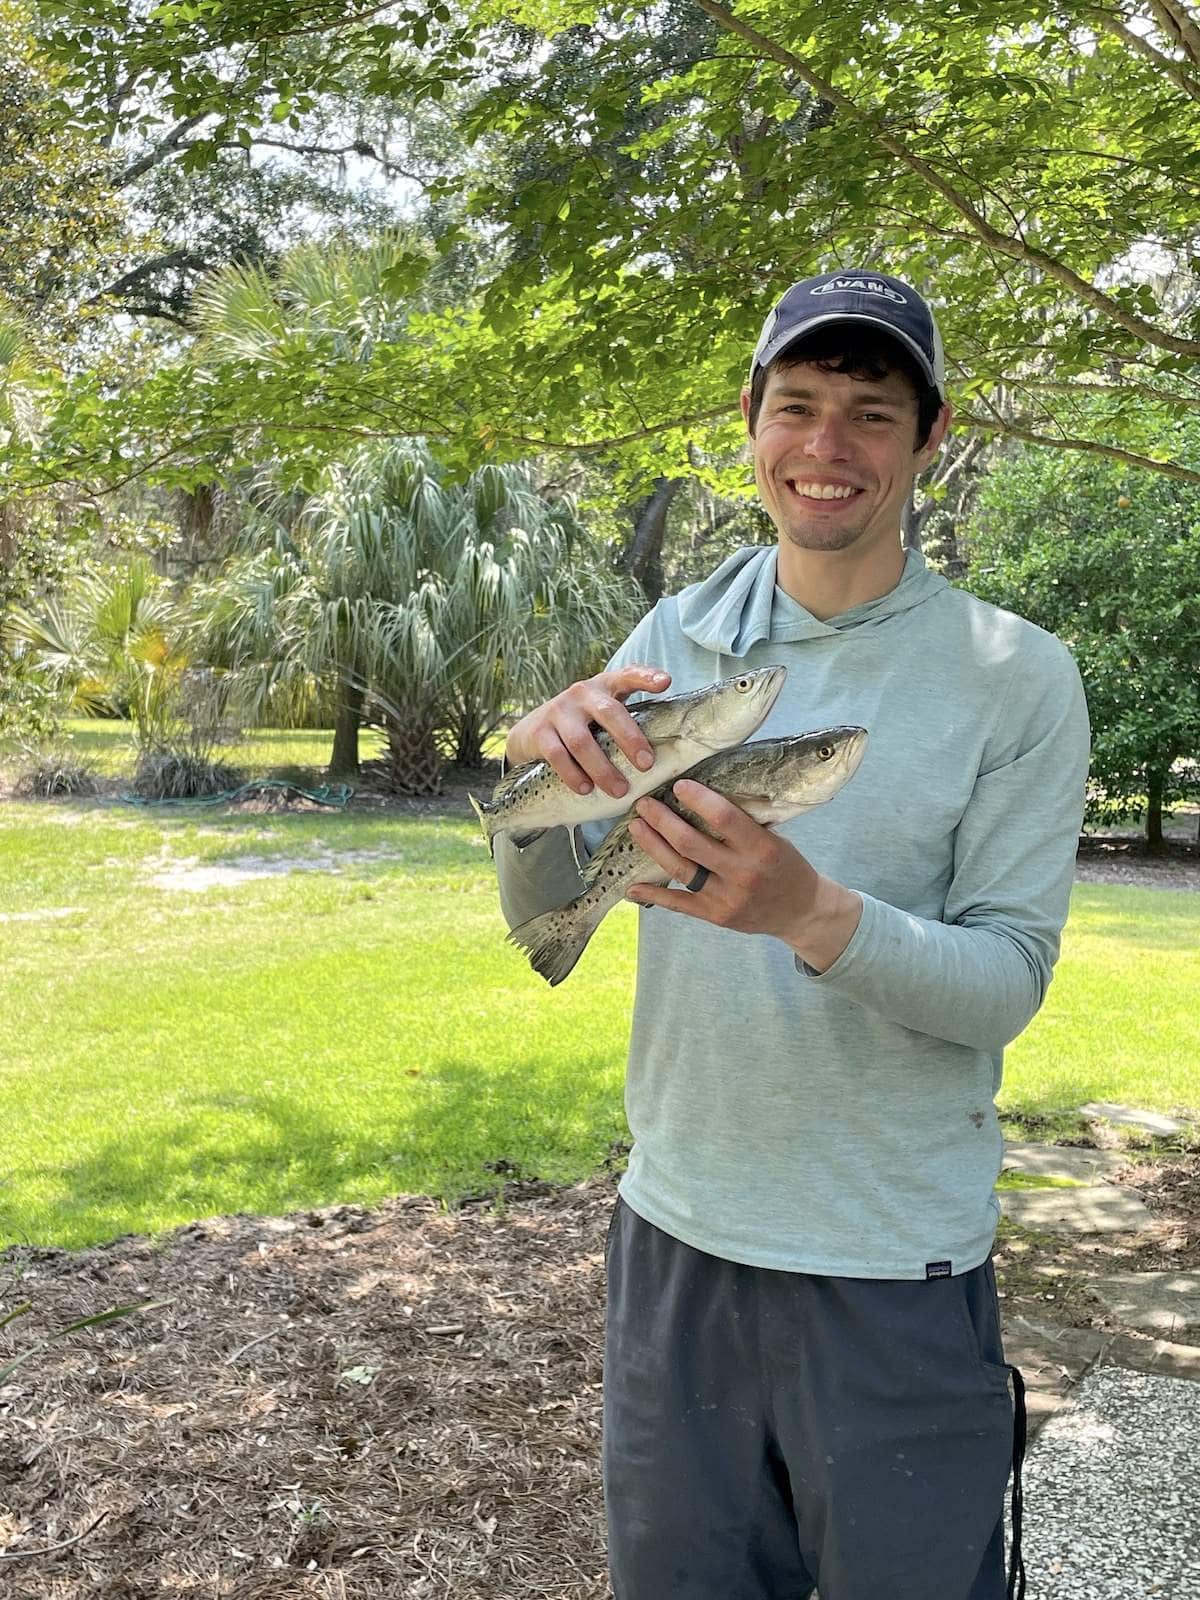 A man in a blue shirt wearing a hat holding two speckled trout.